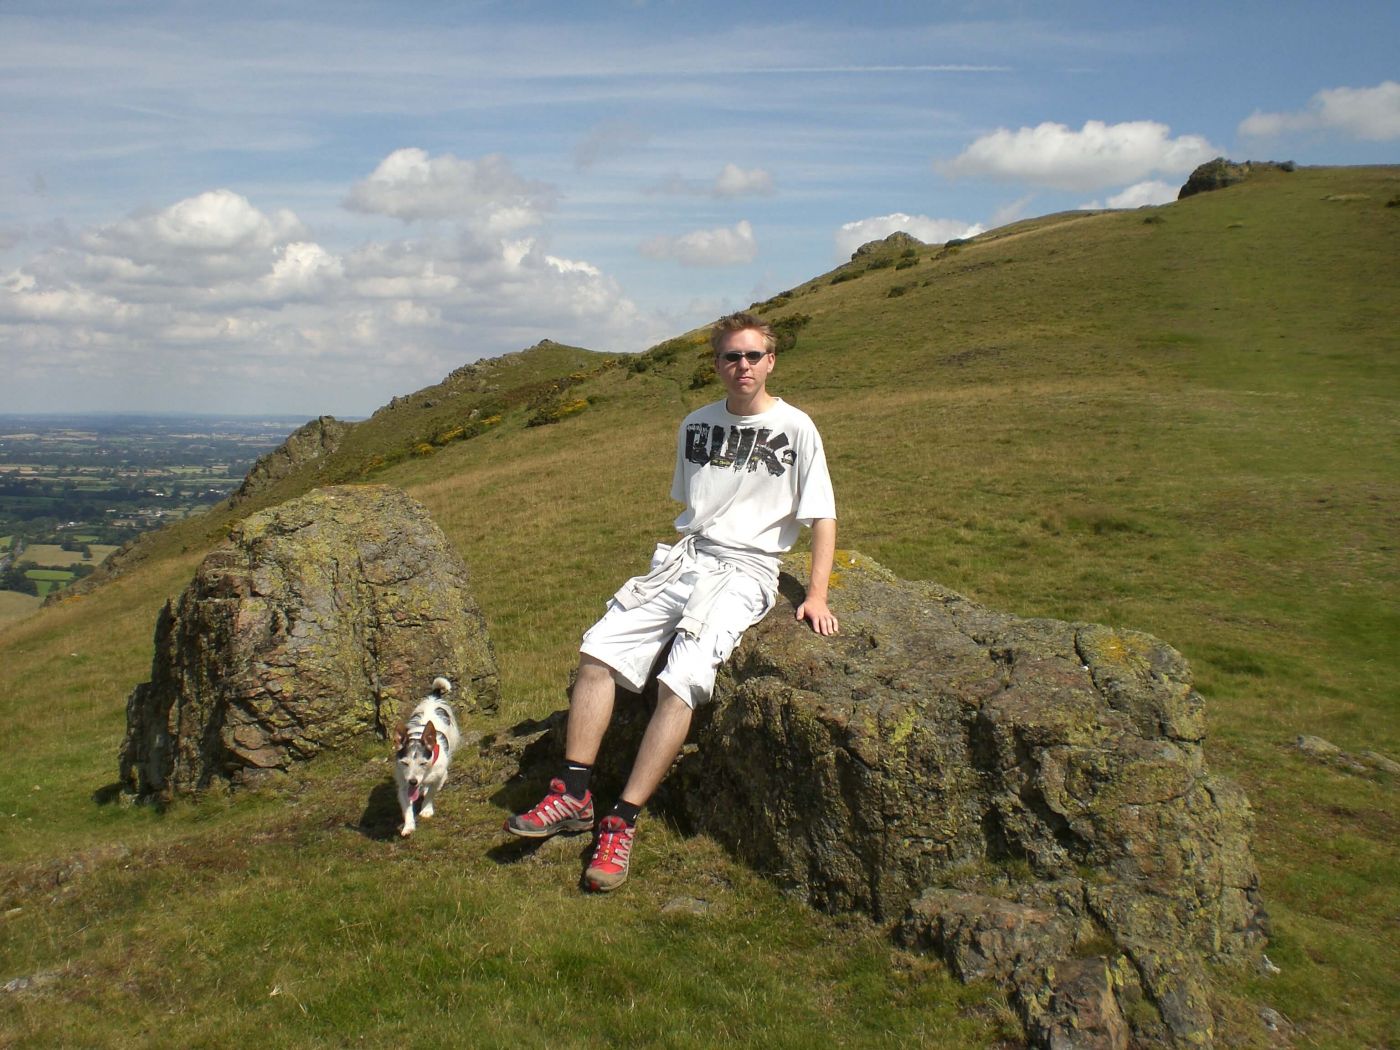 Calum on Caer Caradoc in the Shropshire Hills with his dog Berthe